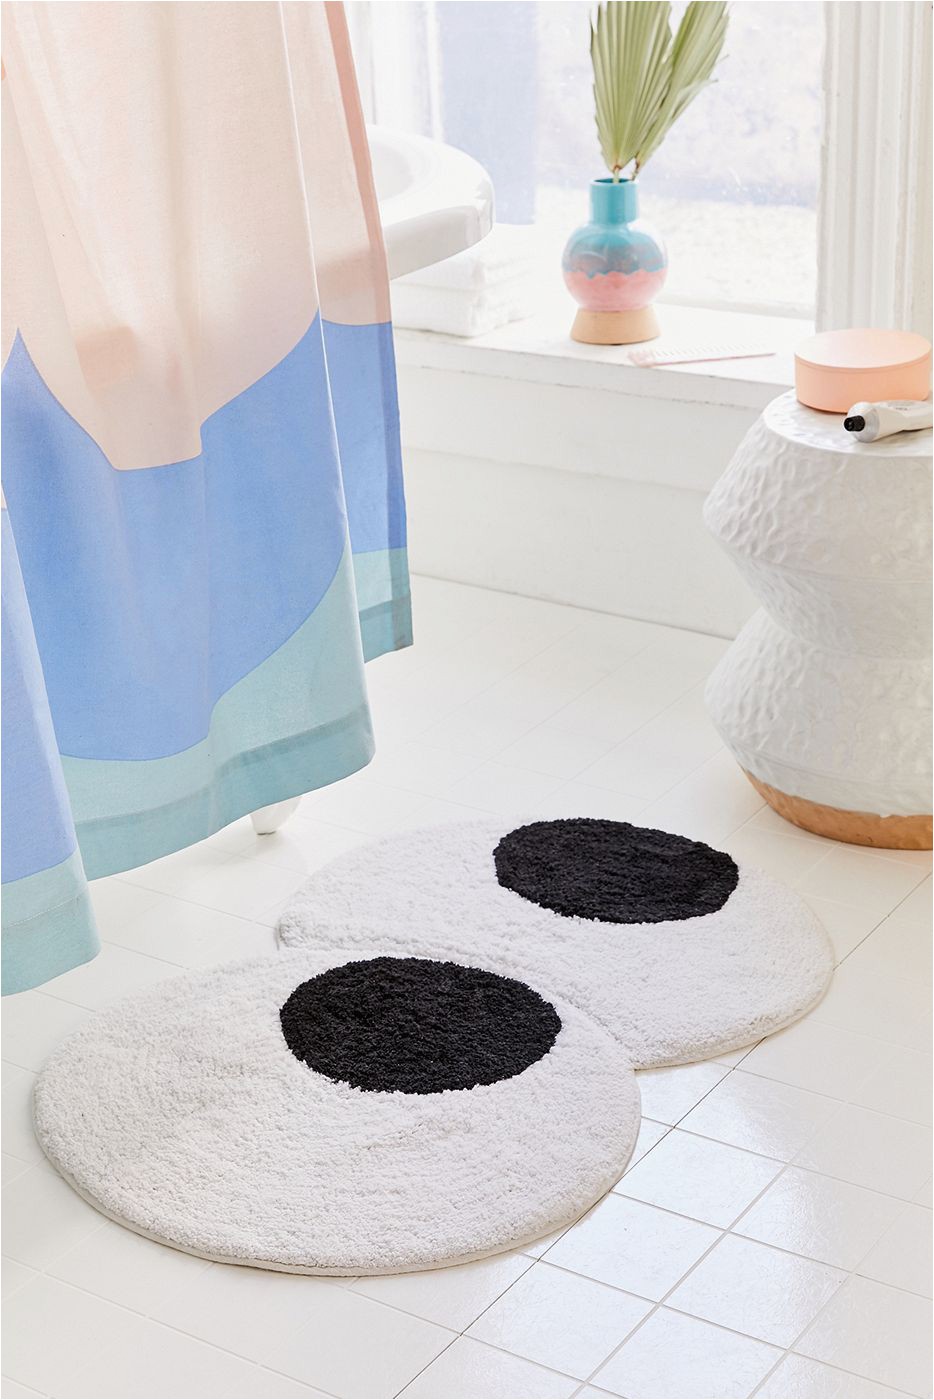 Best Place to Buy Bath Rugs 11 Funny Bath Mats Sure to Make You Smile Every Day Clever